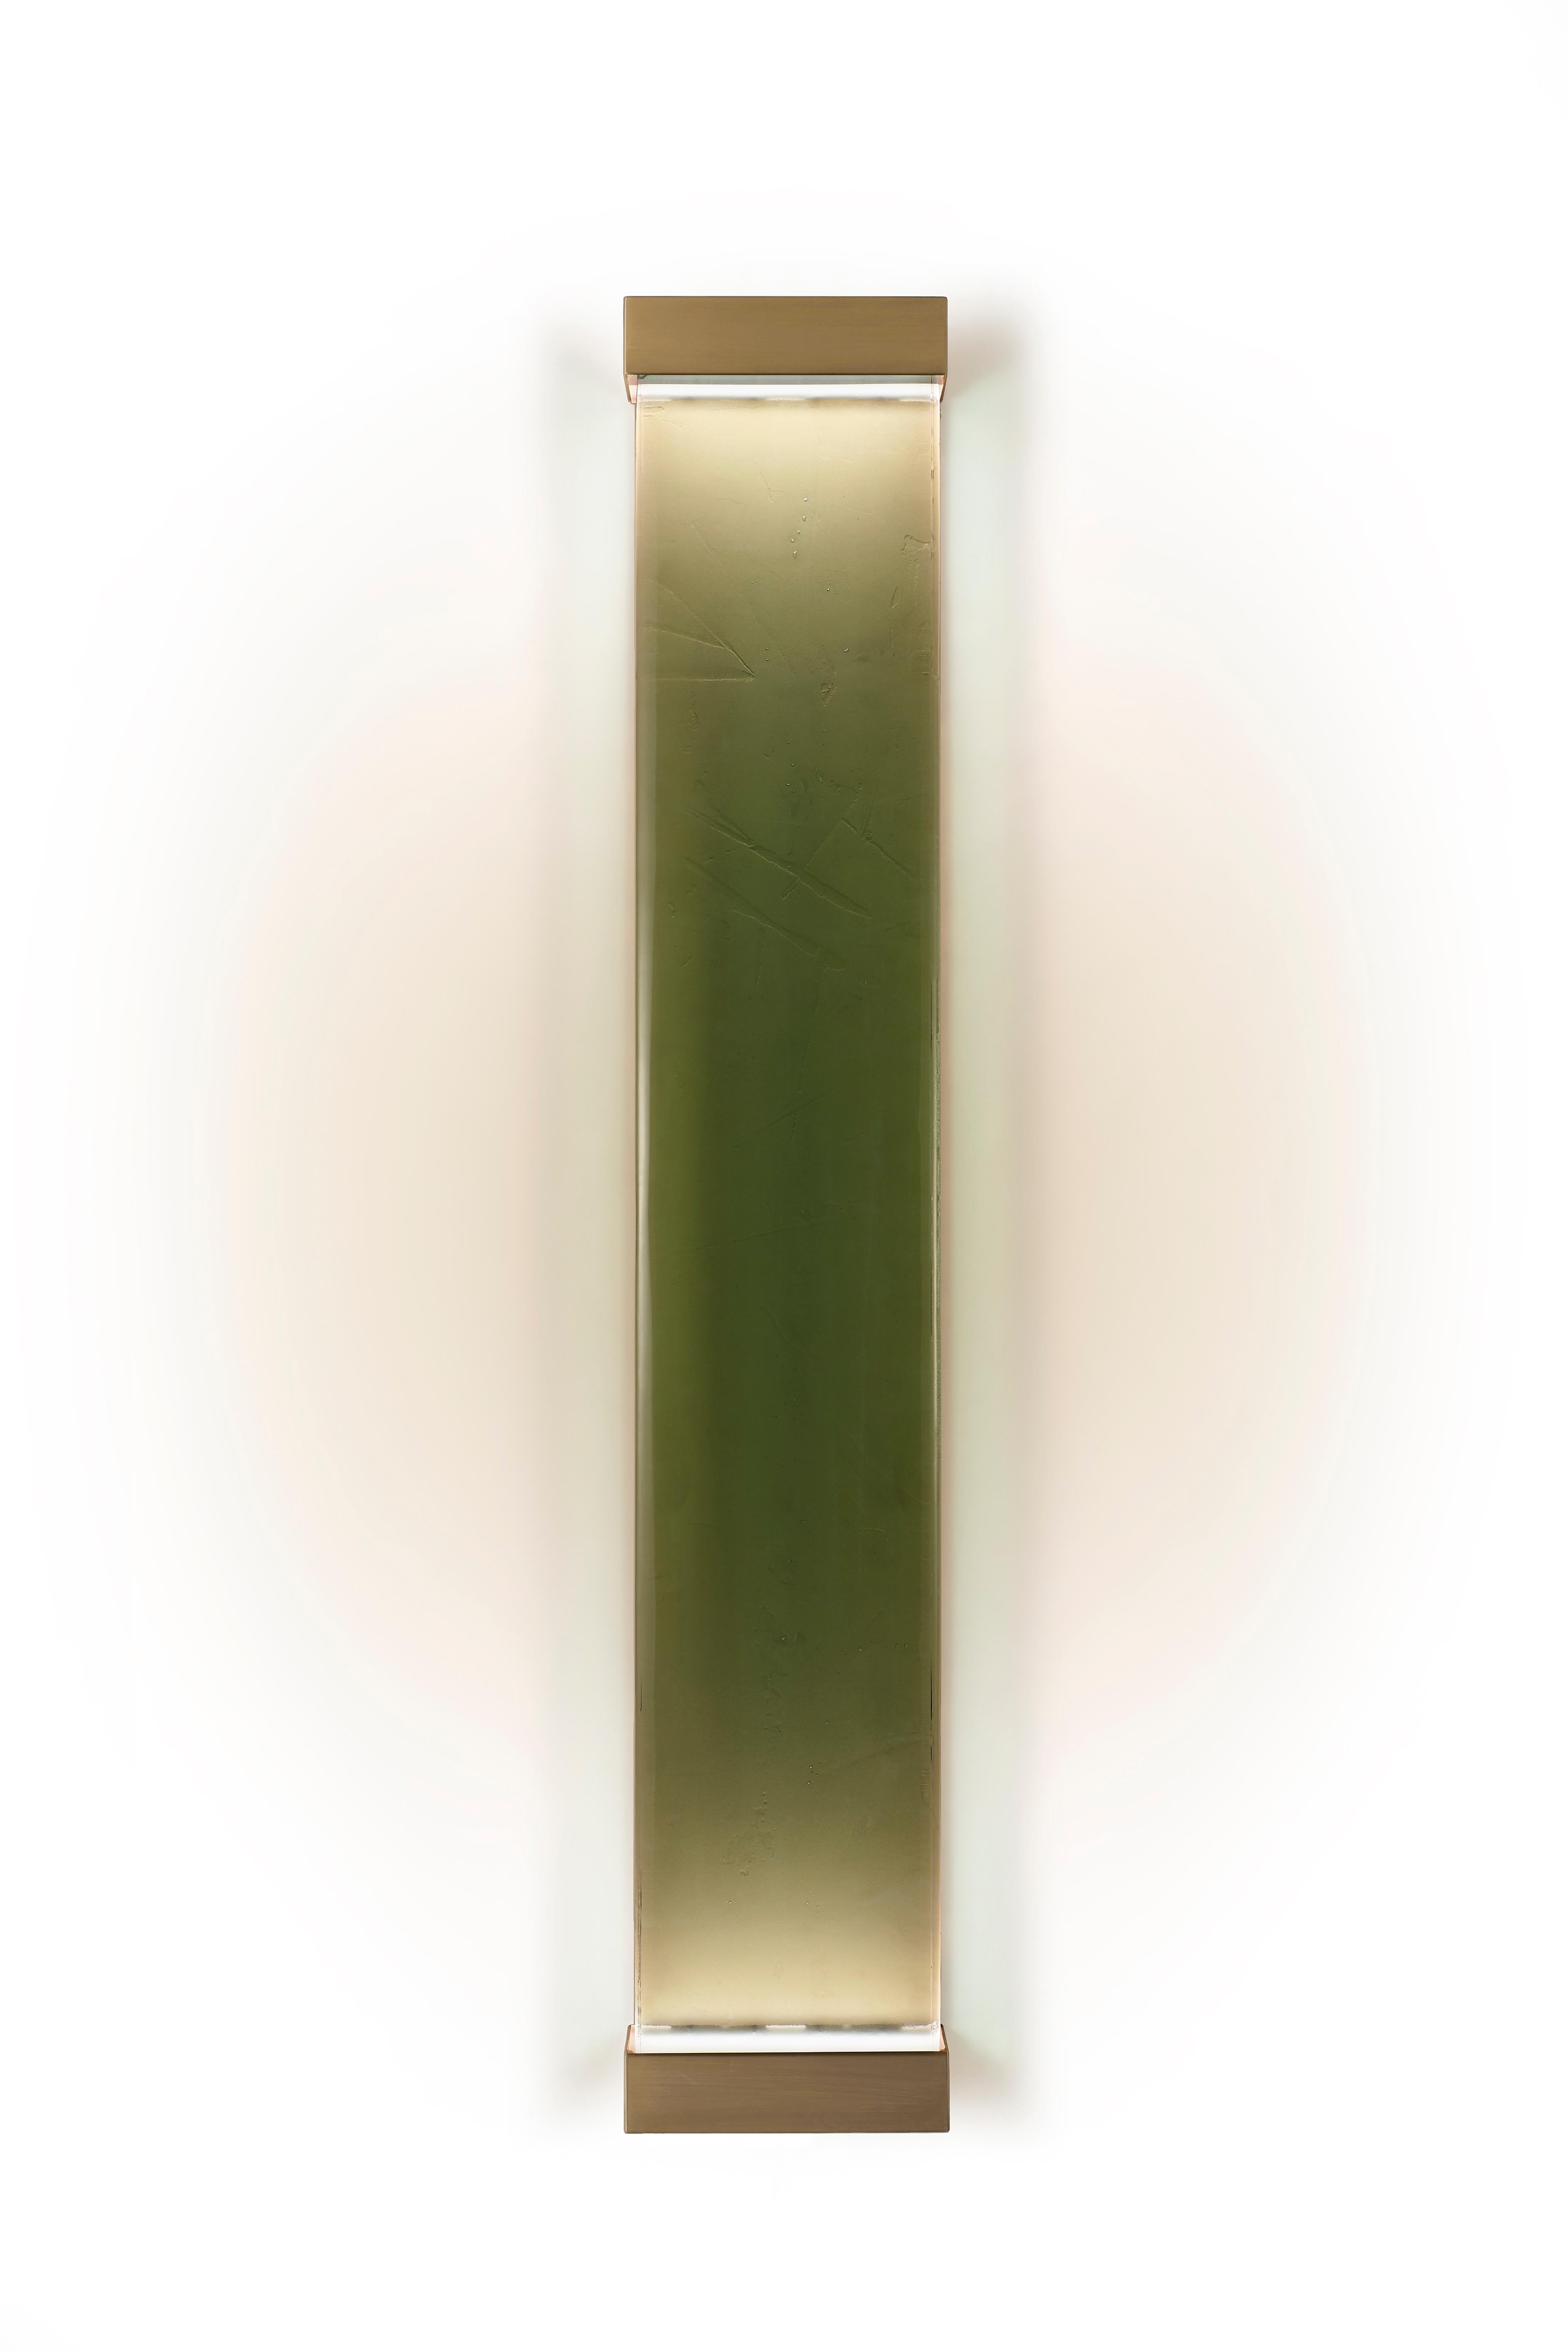 Jud Wall Lamps Agave by Draga&Aurel Resin, 21st Century Glass Resin Brass